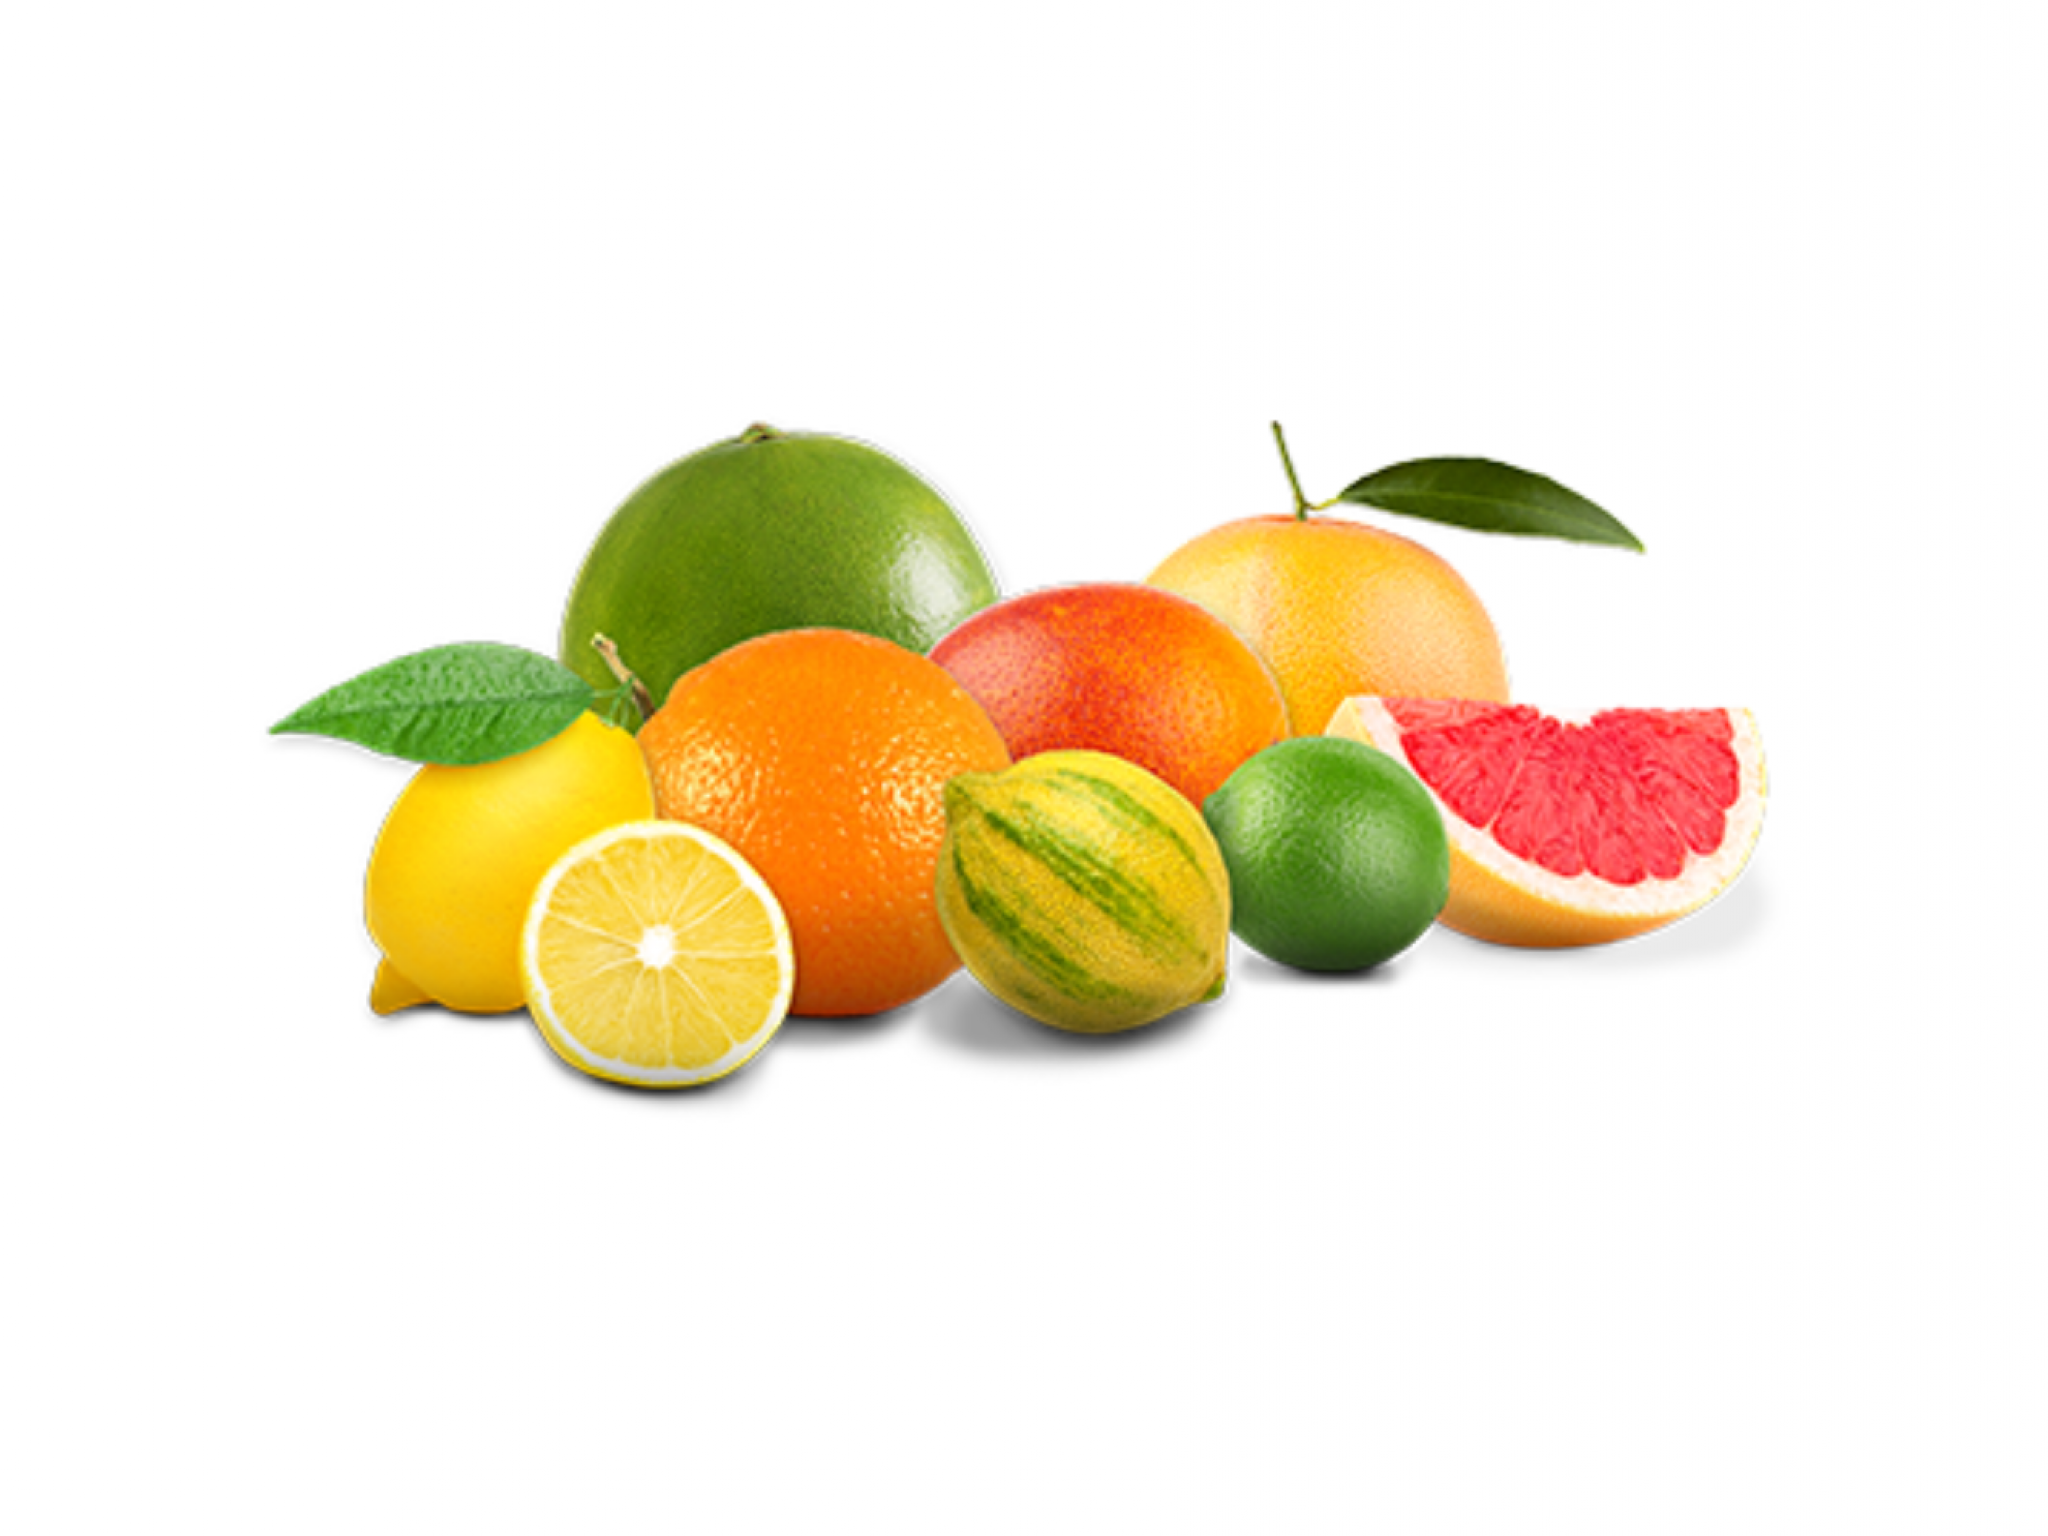  on-the-market-citrus-fruits-company-limoneira-beats-on-q4-revenue--posts-eps-in-line-details 